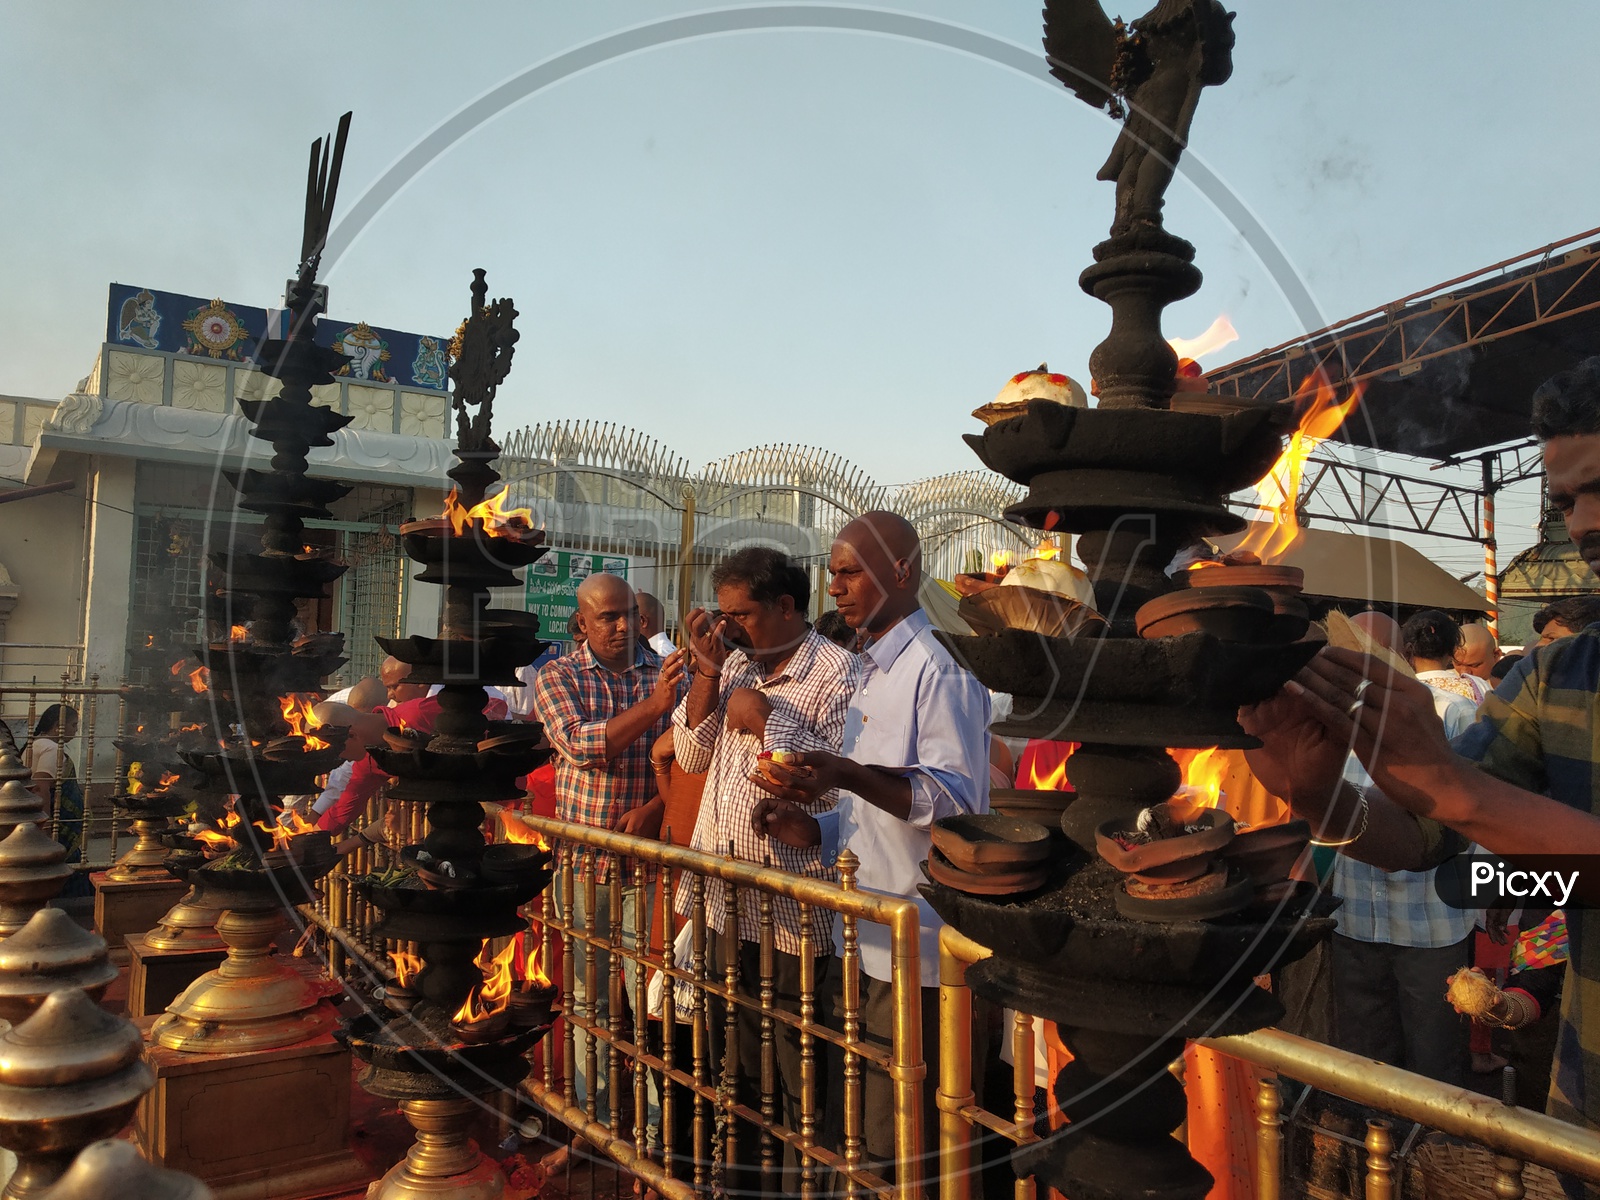 Pilgrims offering prayers in front of the oil lamps